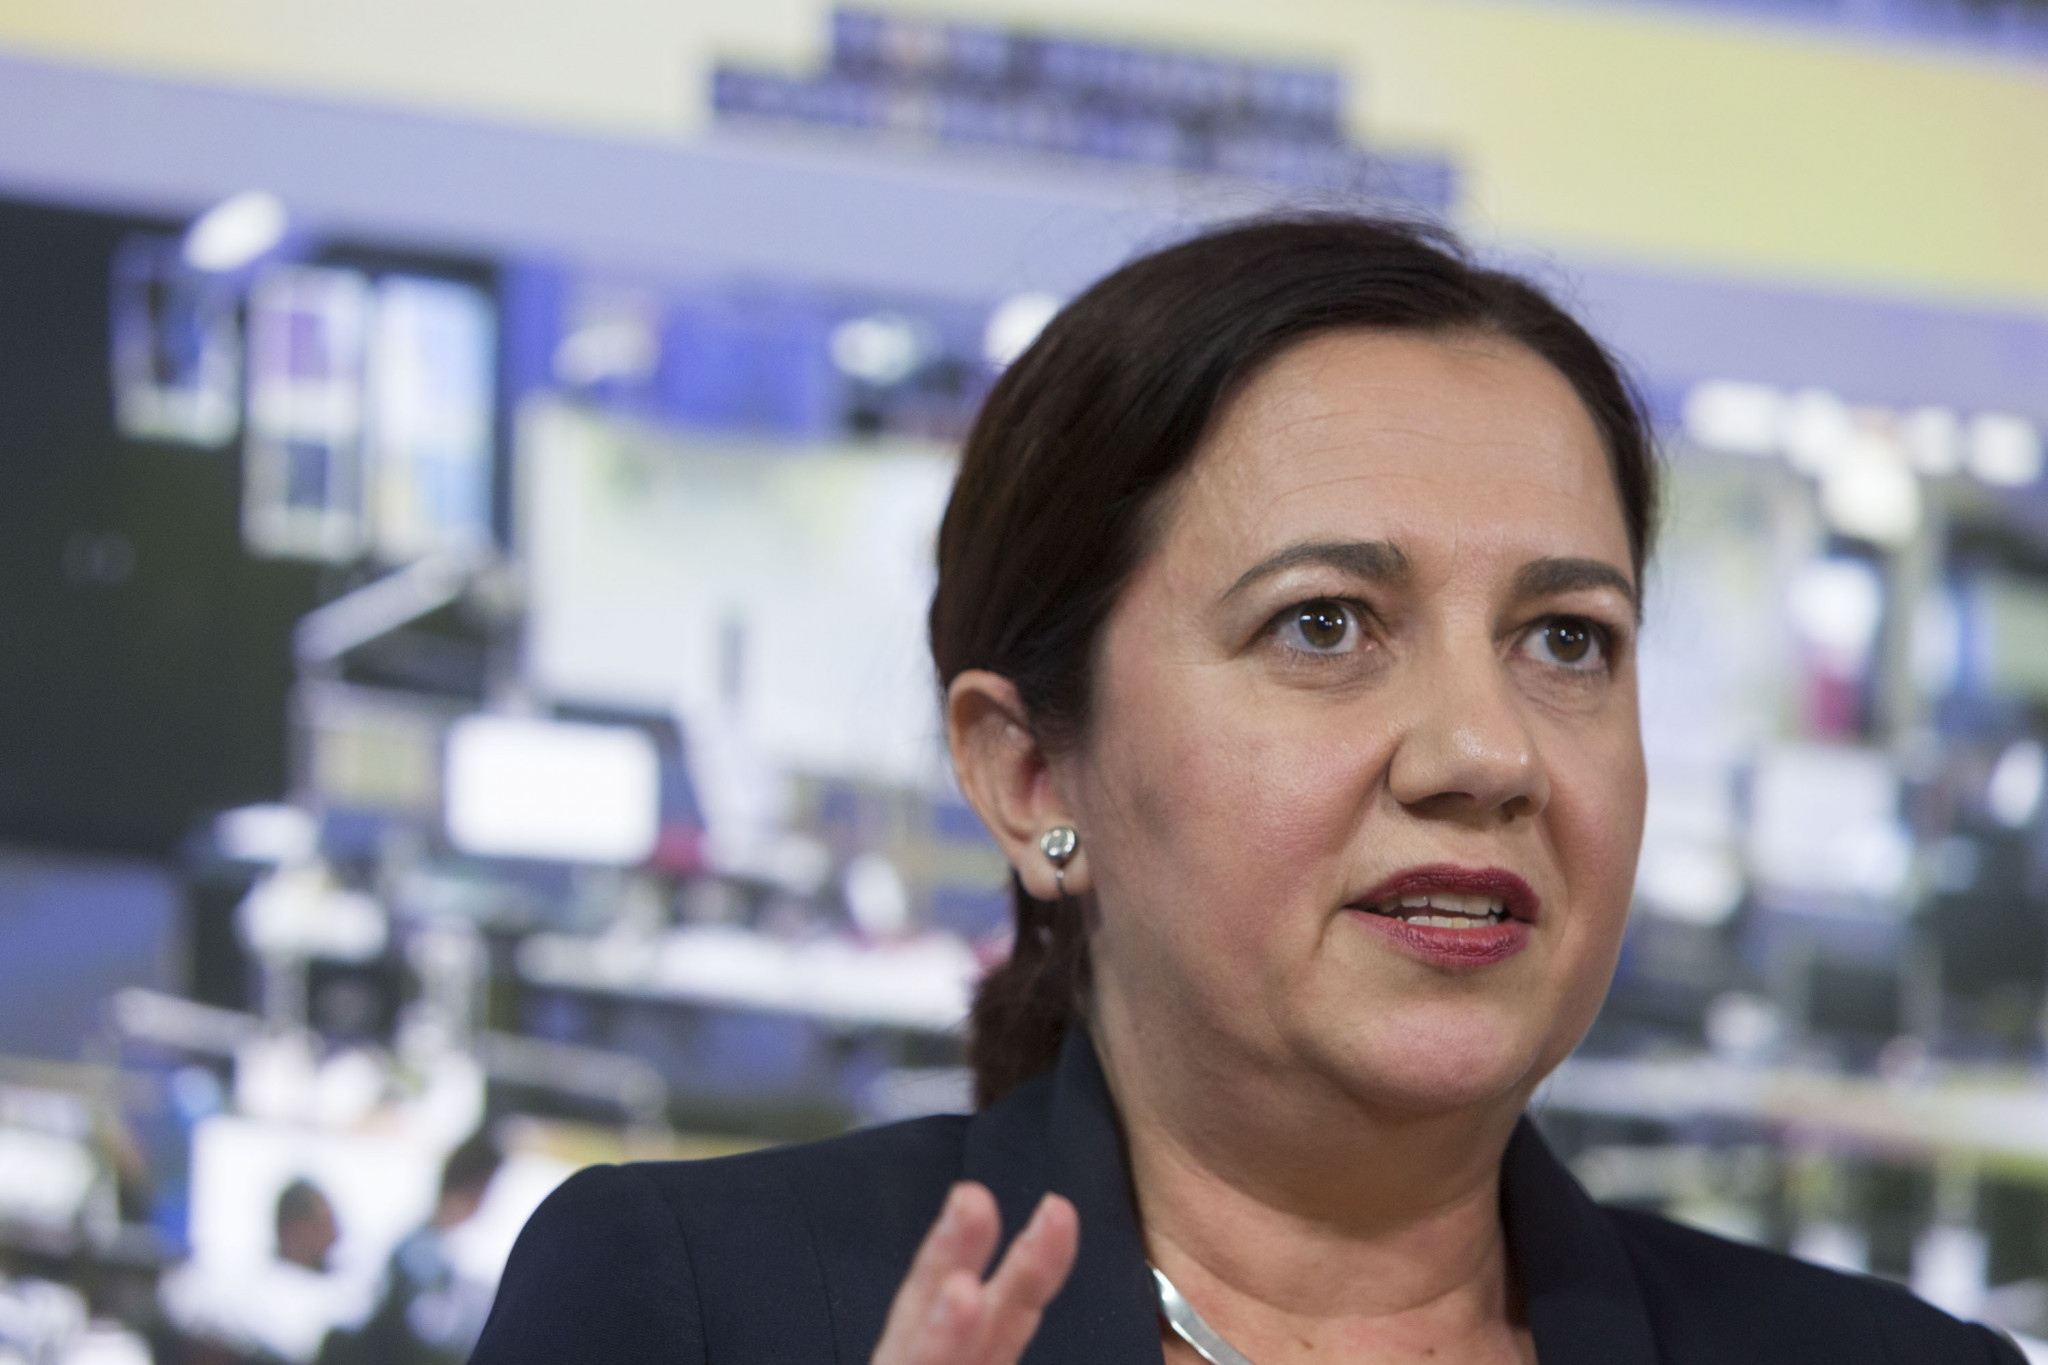 Queensland Premier Annastacia Palaszczuk has said the donations are part of the Gold Coast 2018 legacy programme ©Getty Images